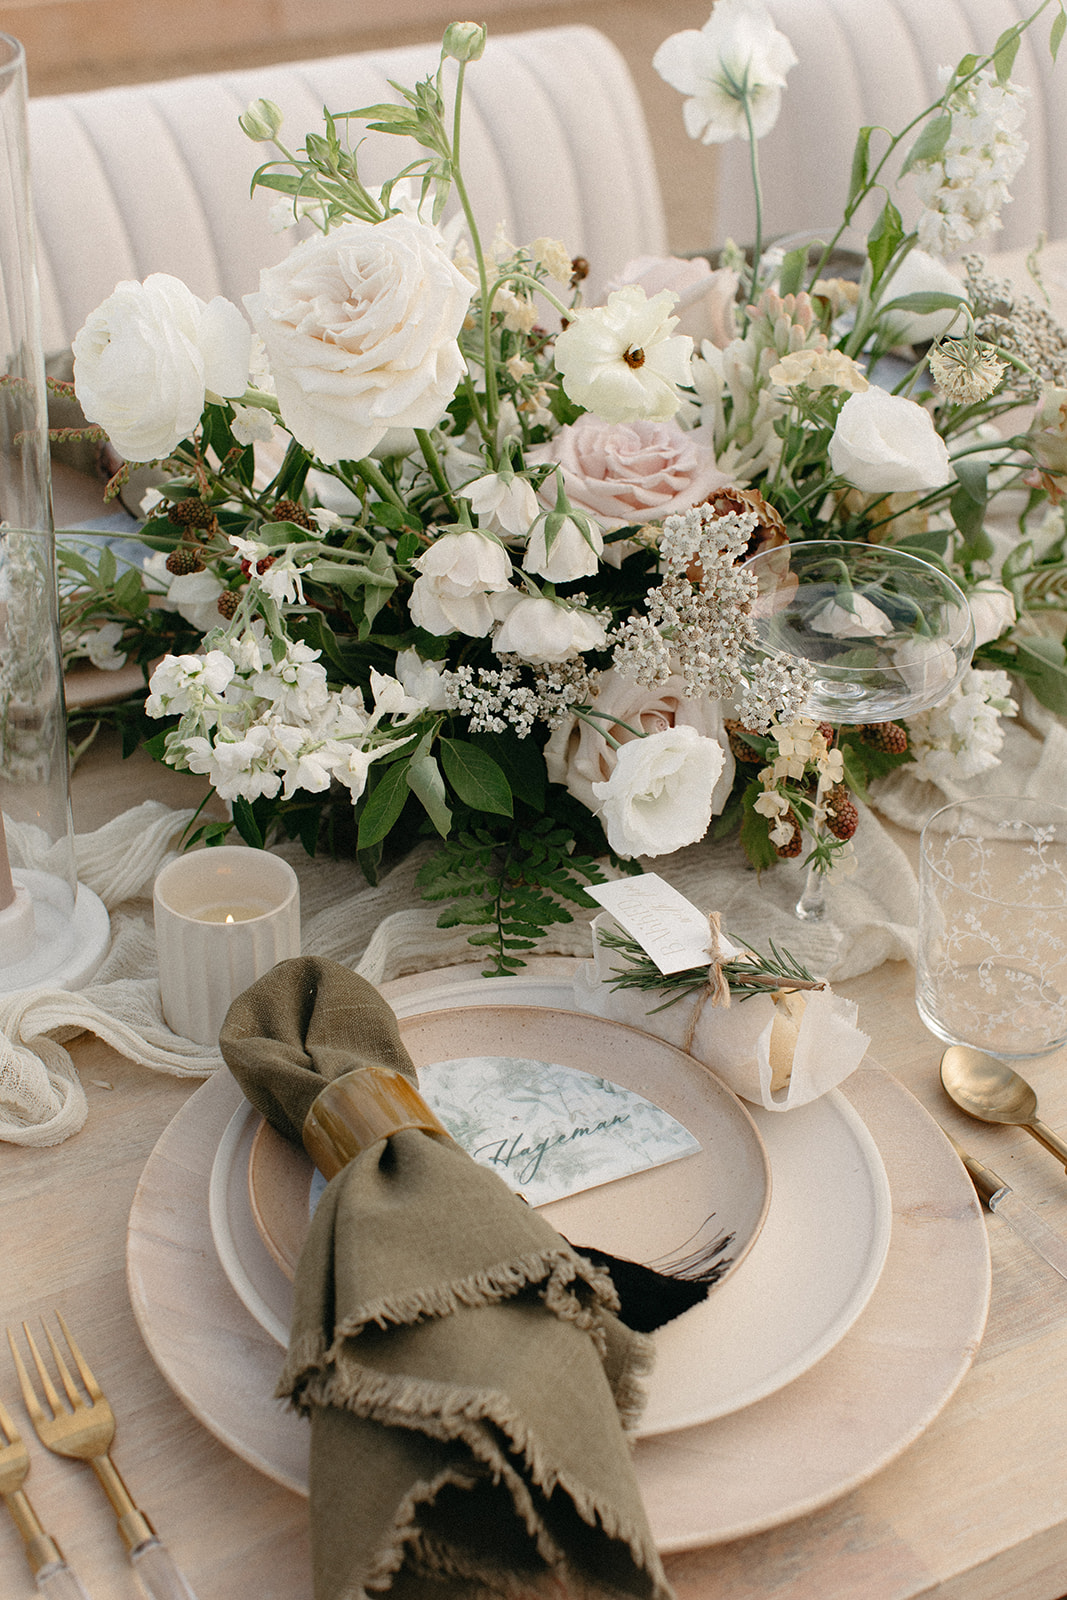 natural linens for wedding reception